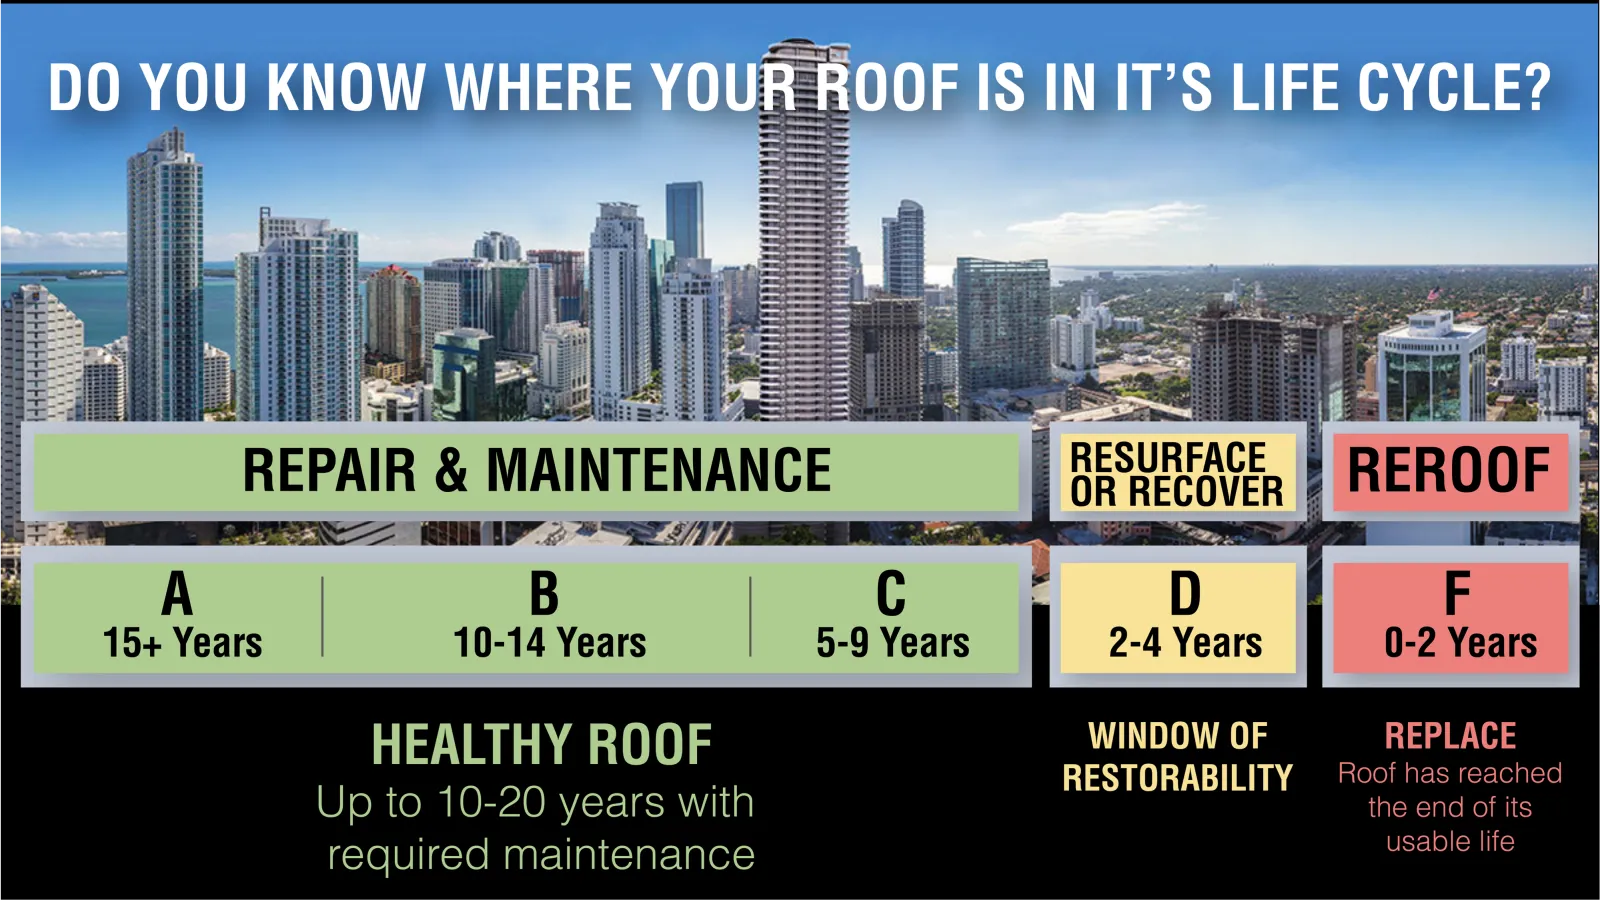 Life cycle of a roof